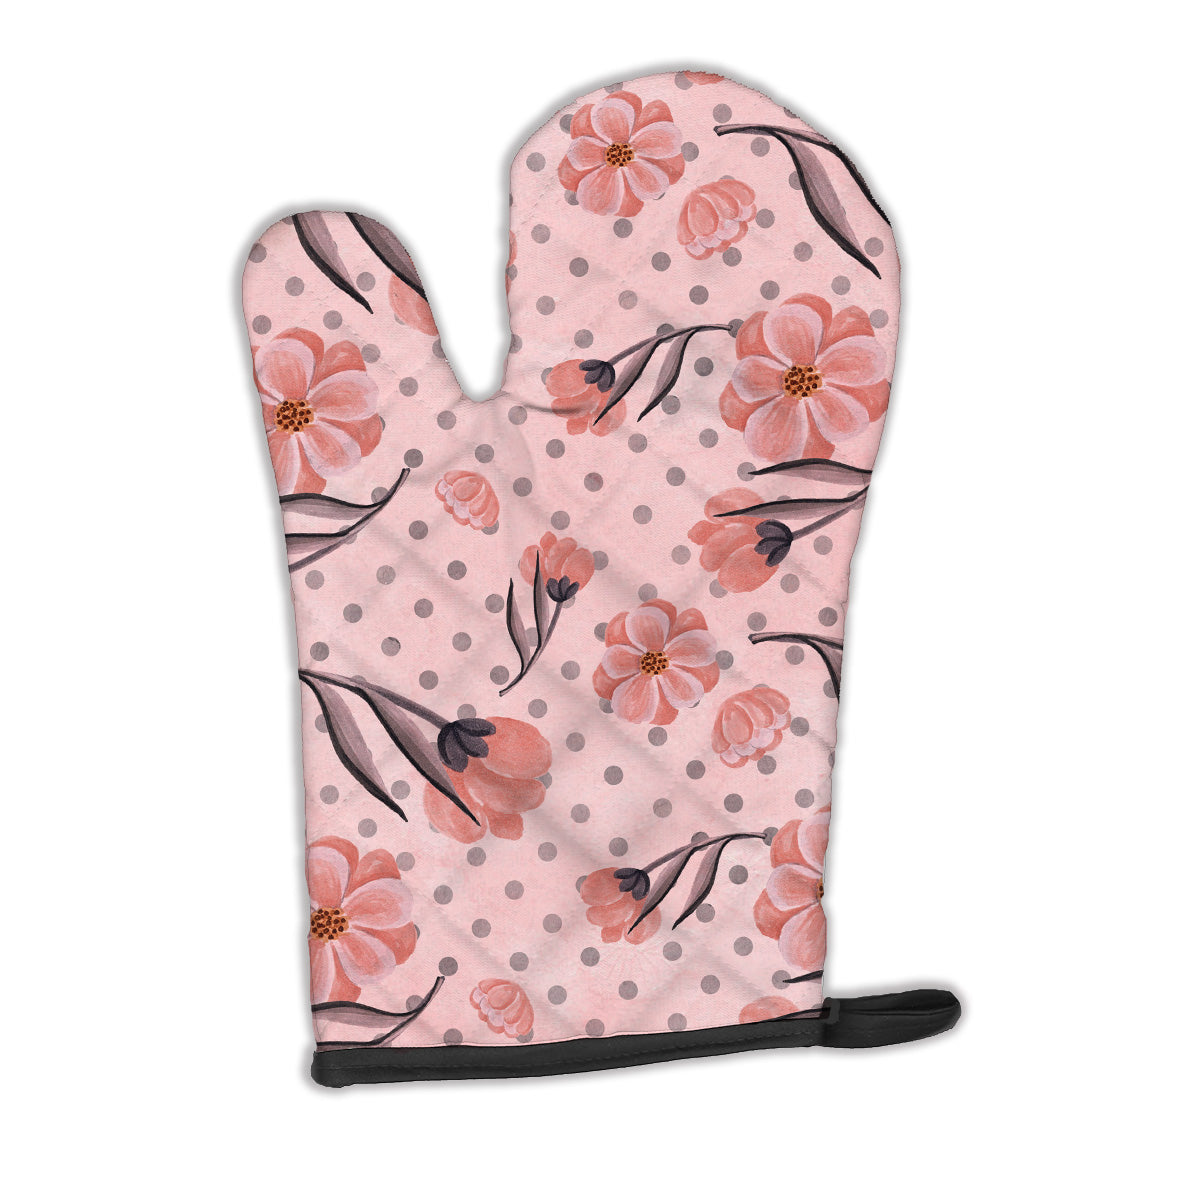 Pink Flowers and Polka Dots Oven Mitt BB7499OVMT